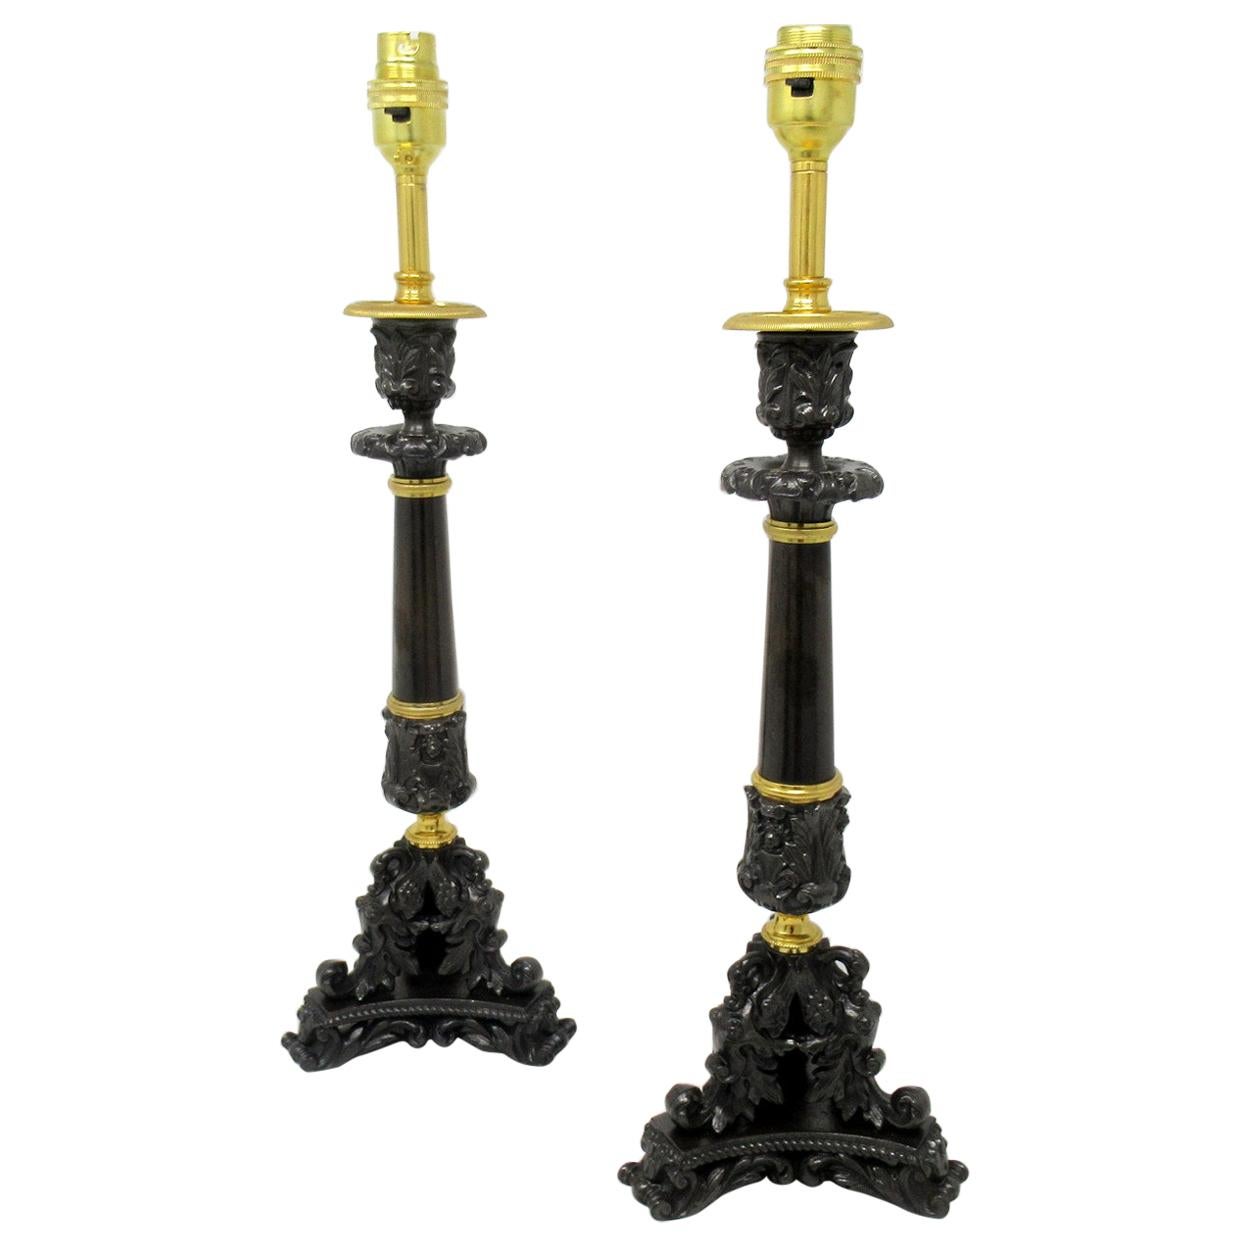 Pair of French Bronzed Neoclassical Ormolu Table Candlestick Lamps, 19th Century